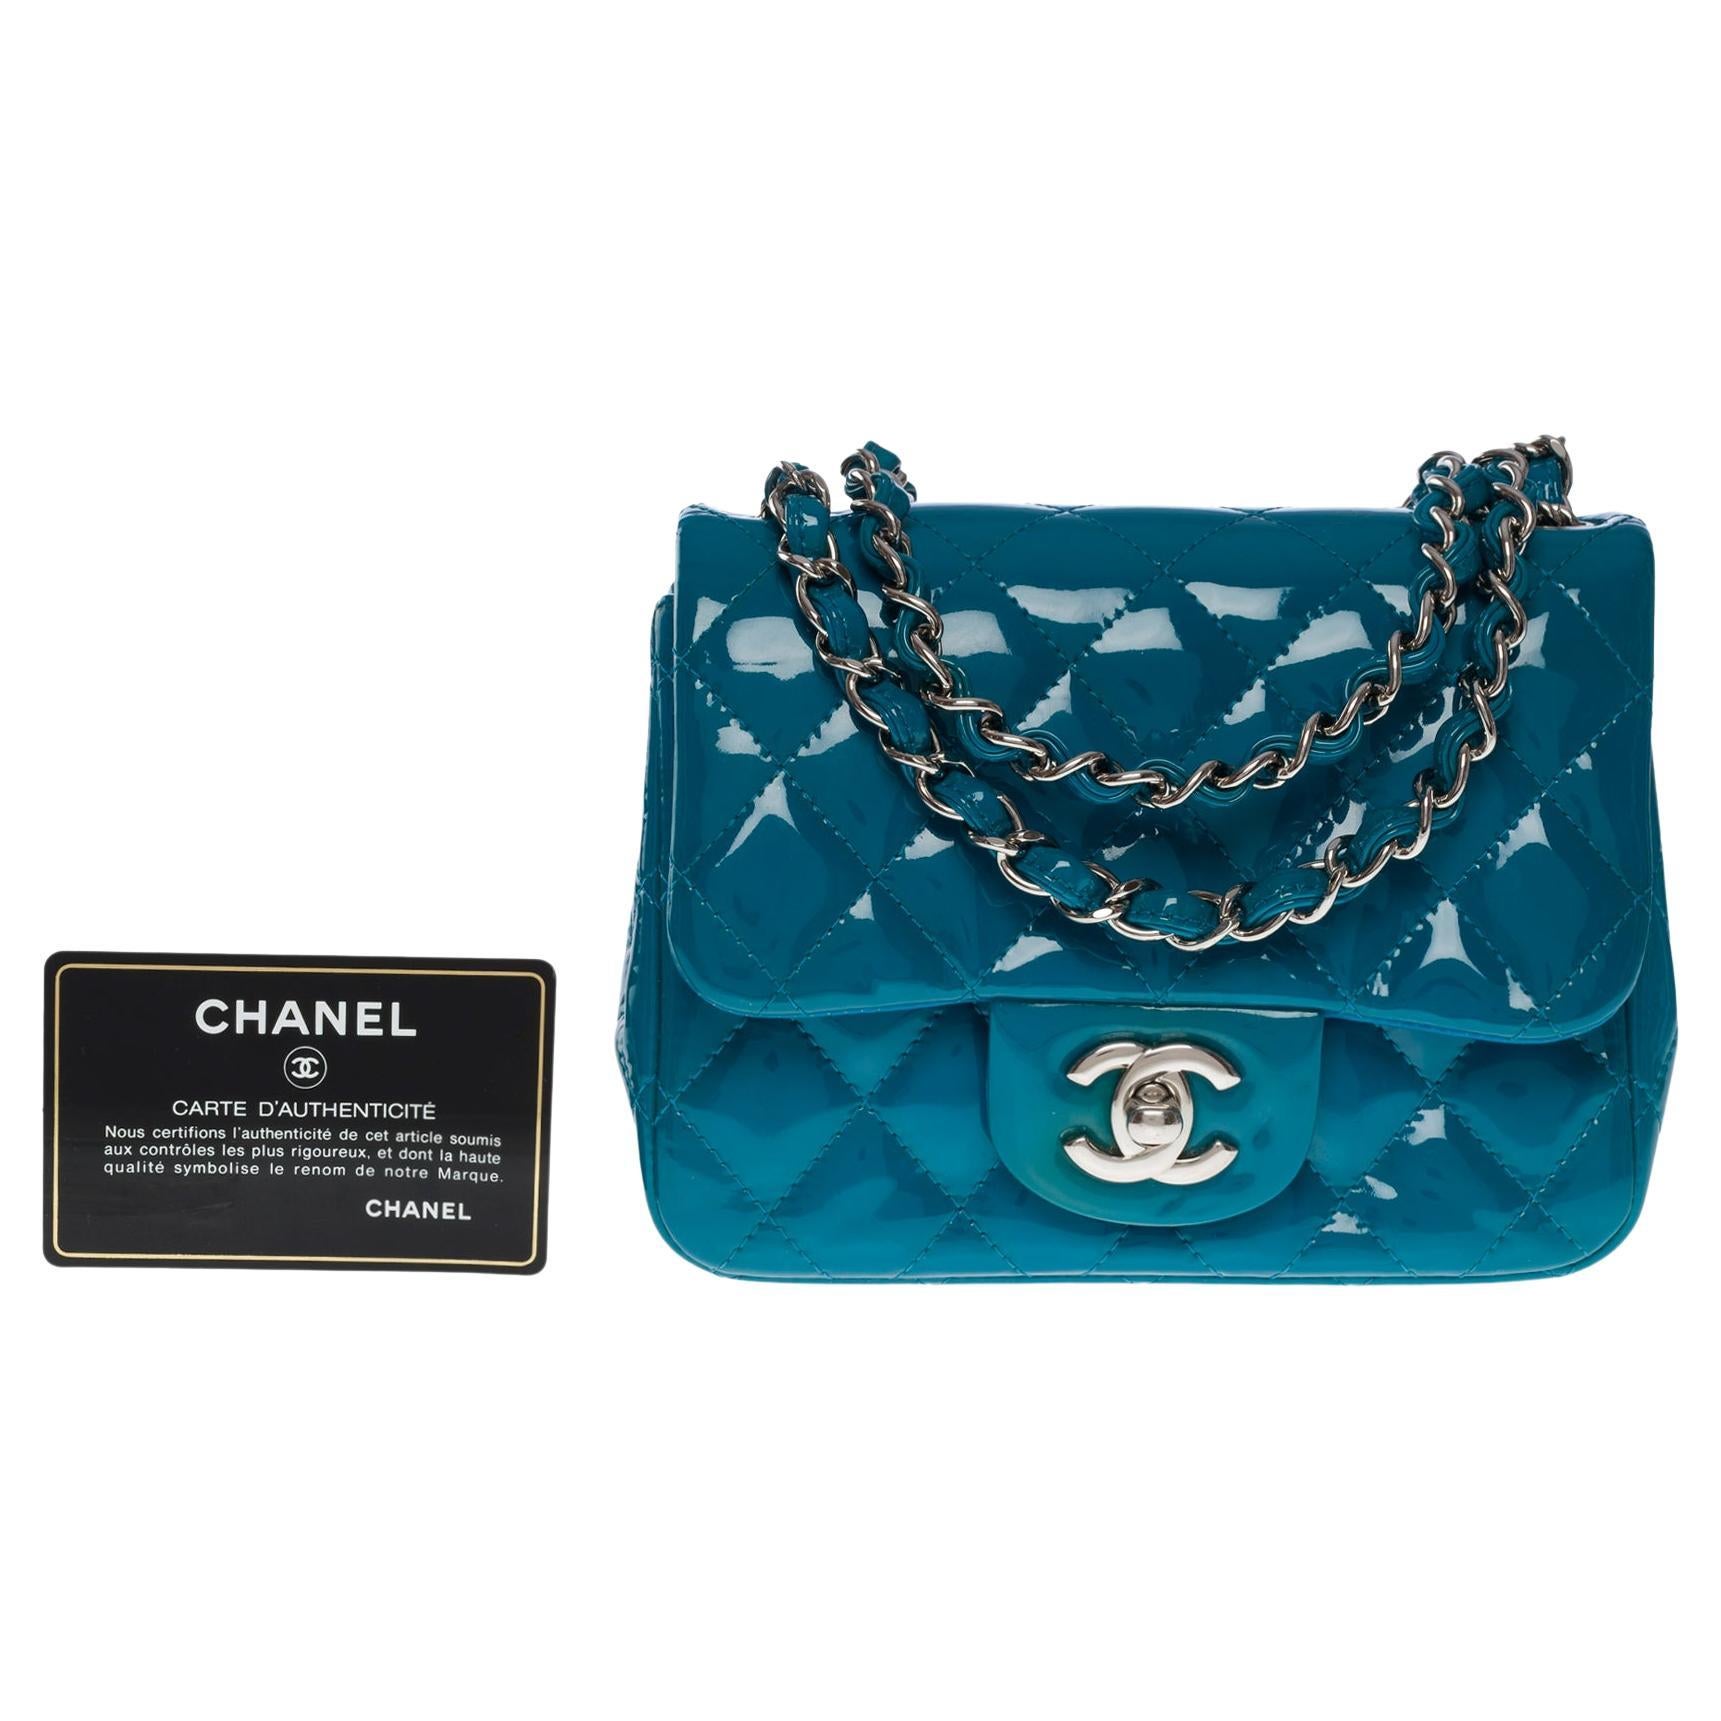 Chanel Navy Blue Quilted Patent Leather Maxi Single Flap Bag with